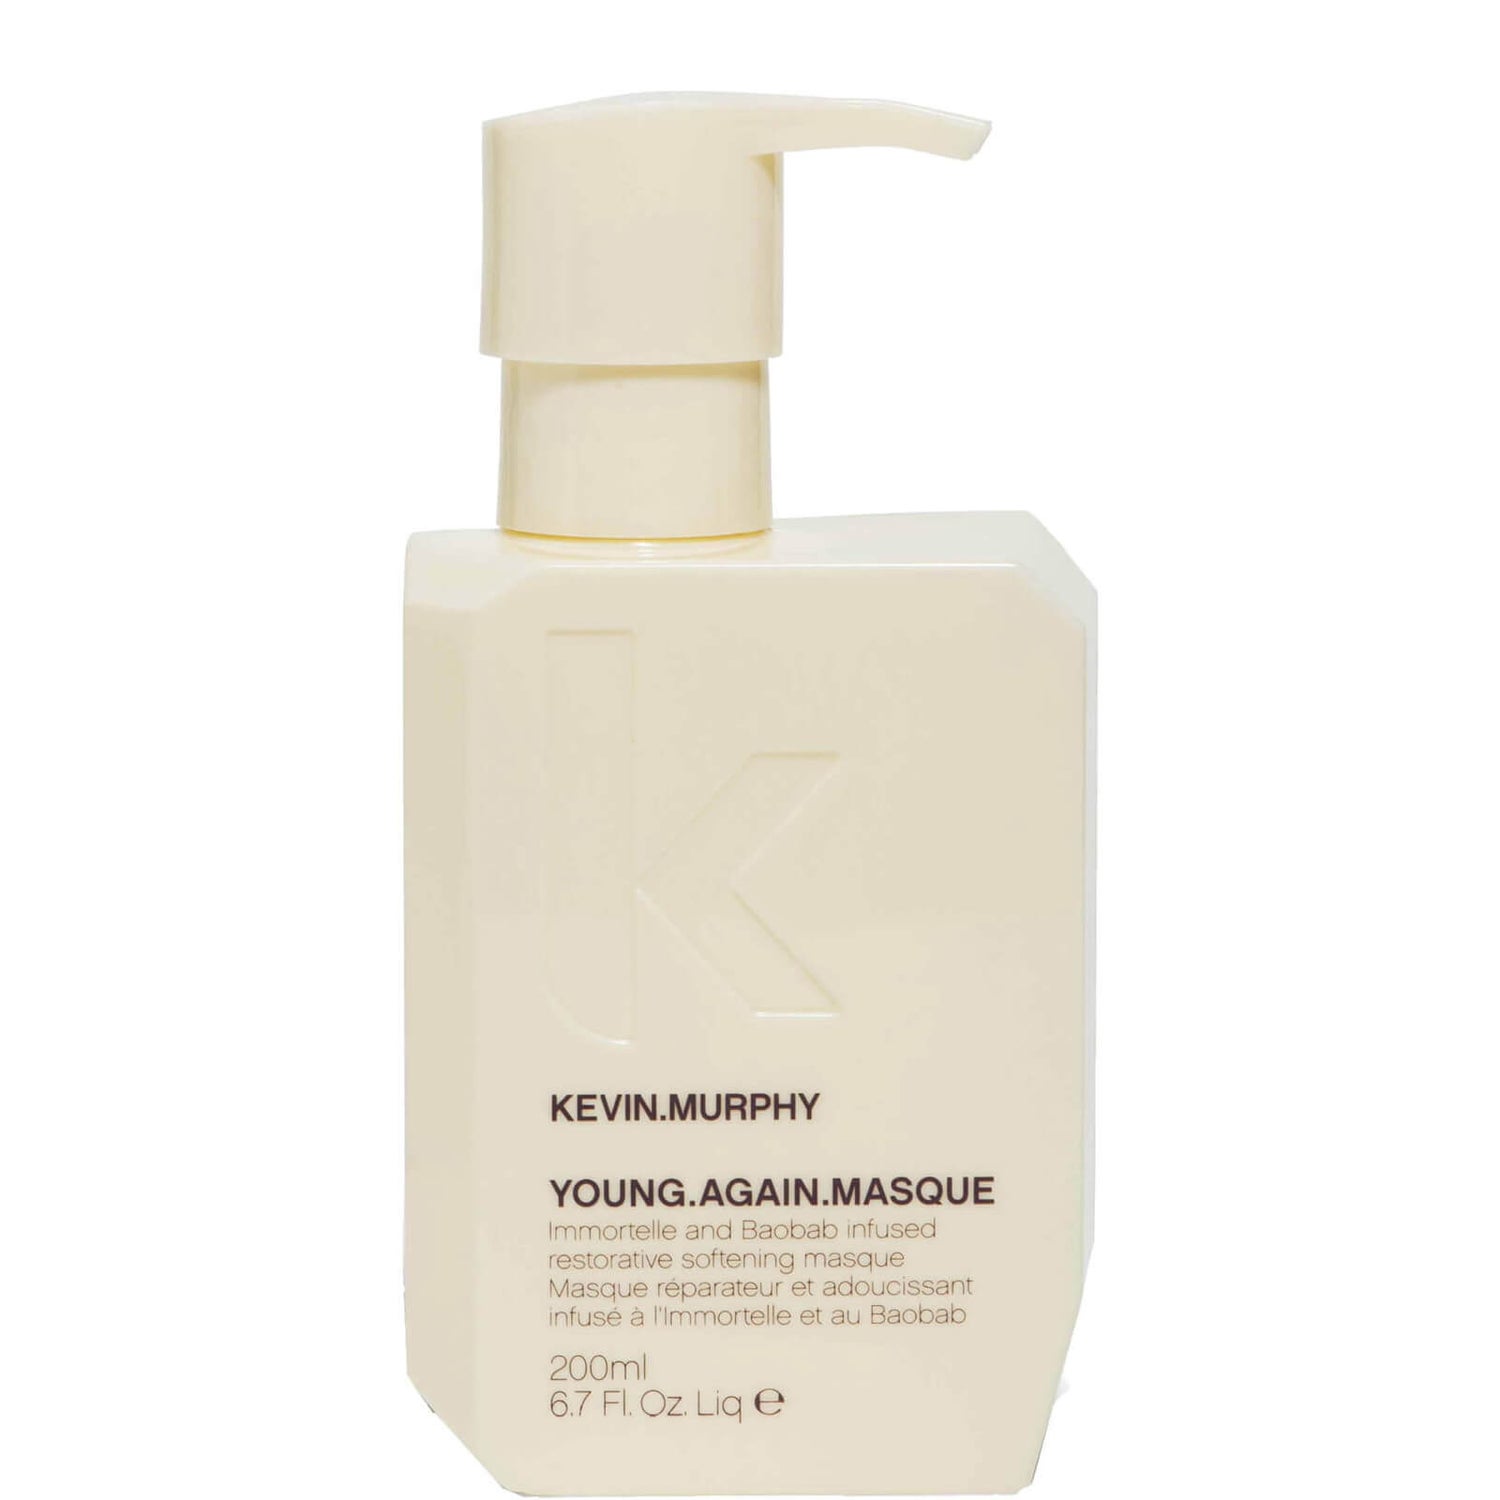 KEVIN MURPHY YOUNG AGAIN MASQUE 200ml